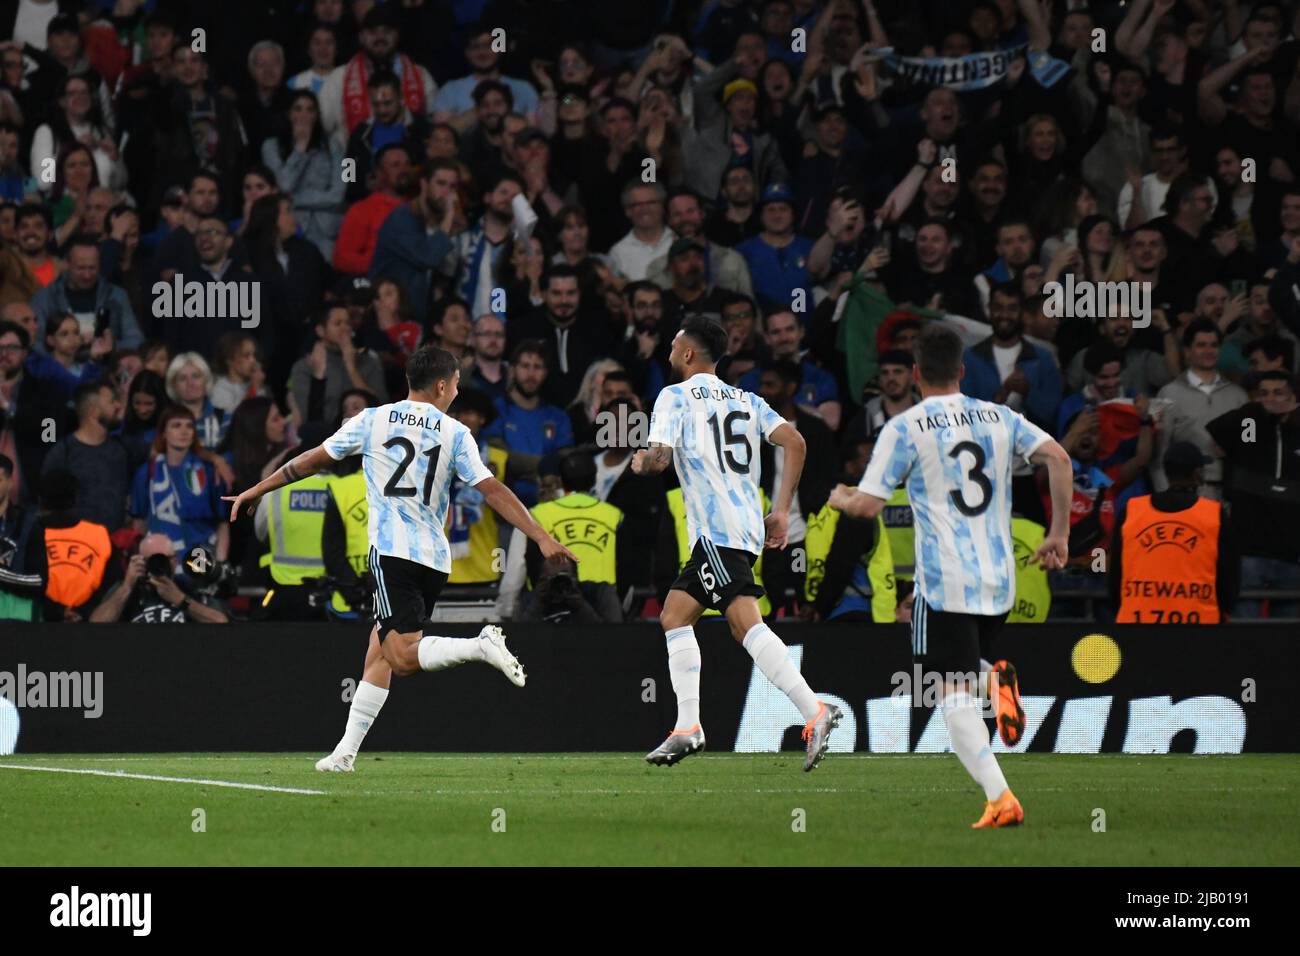 WEMBLEY, ENGLAND - JUNE 1: Dybala of Argentina celebrates after scoring a goal during the Finalissima match between Italy and Argentina at Wembley Stadium on June 1, 2022 in Wembley, England. (Photo by Sara Aribó/PxImages) Credit: Px Images/Alamy Live News Stock Photo